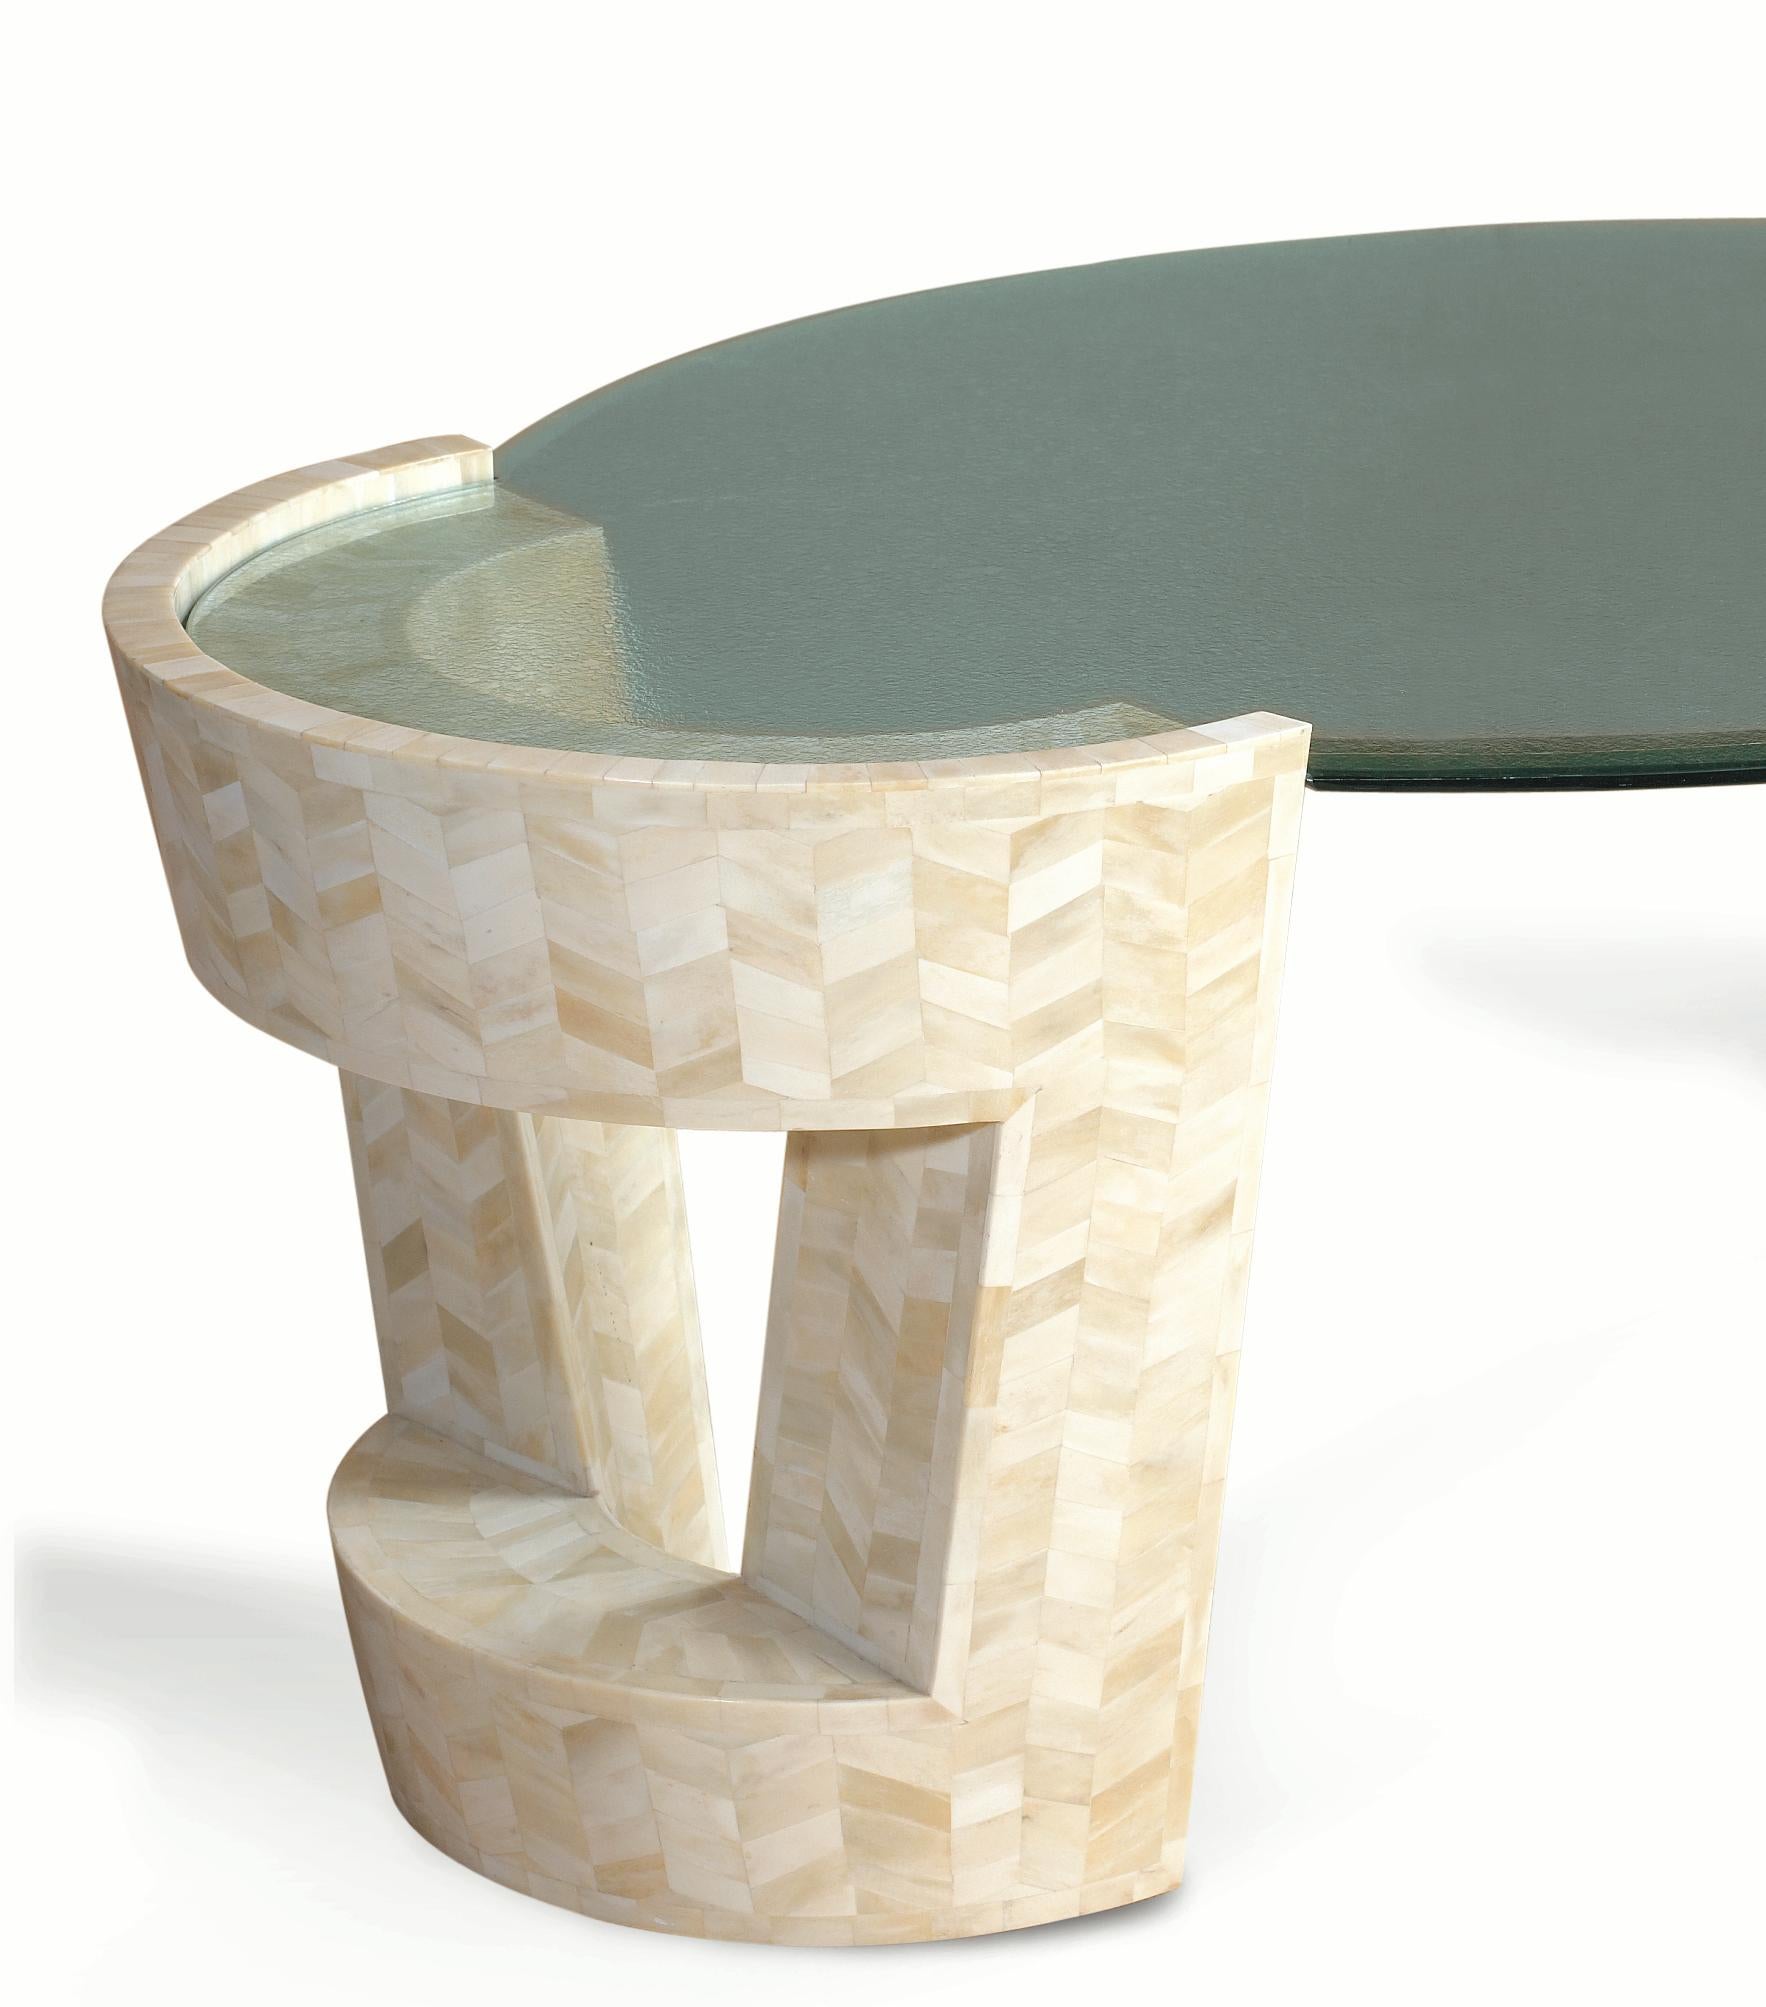 Solid wood curves coated with creamy camel bone chips give this piece its name. Fitted with a frosted glass top that connects the handcrafted crescents, the Cheesecake Table is delectably unique.

Size: 33